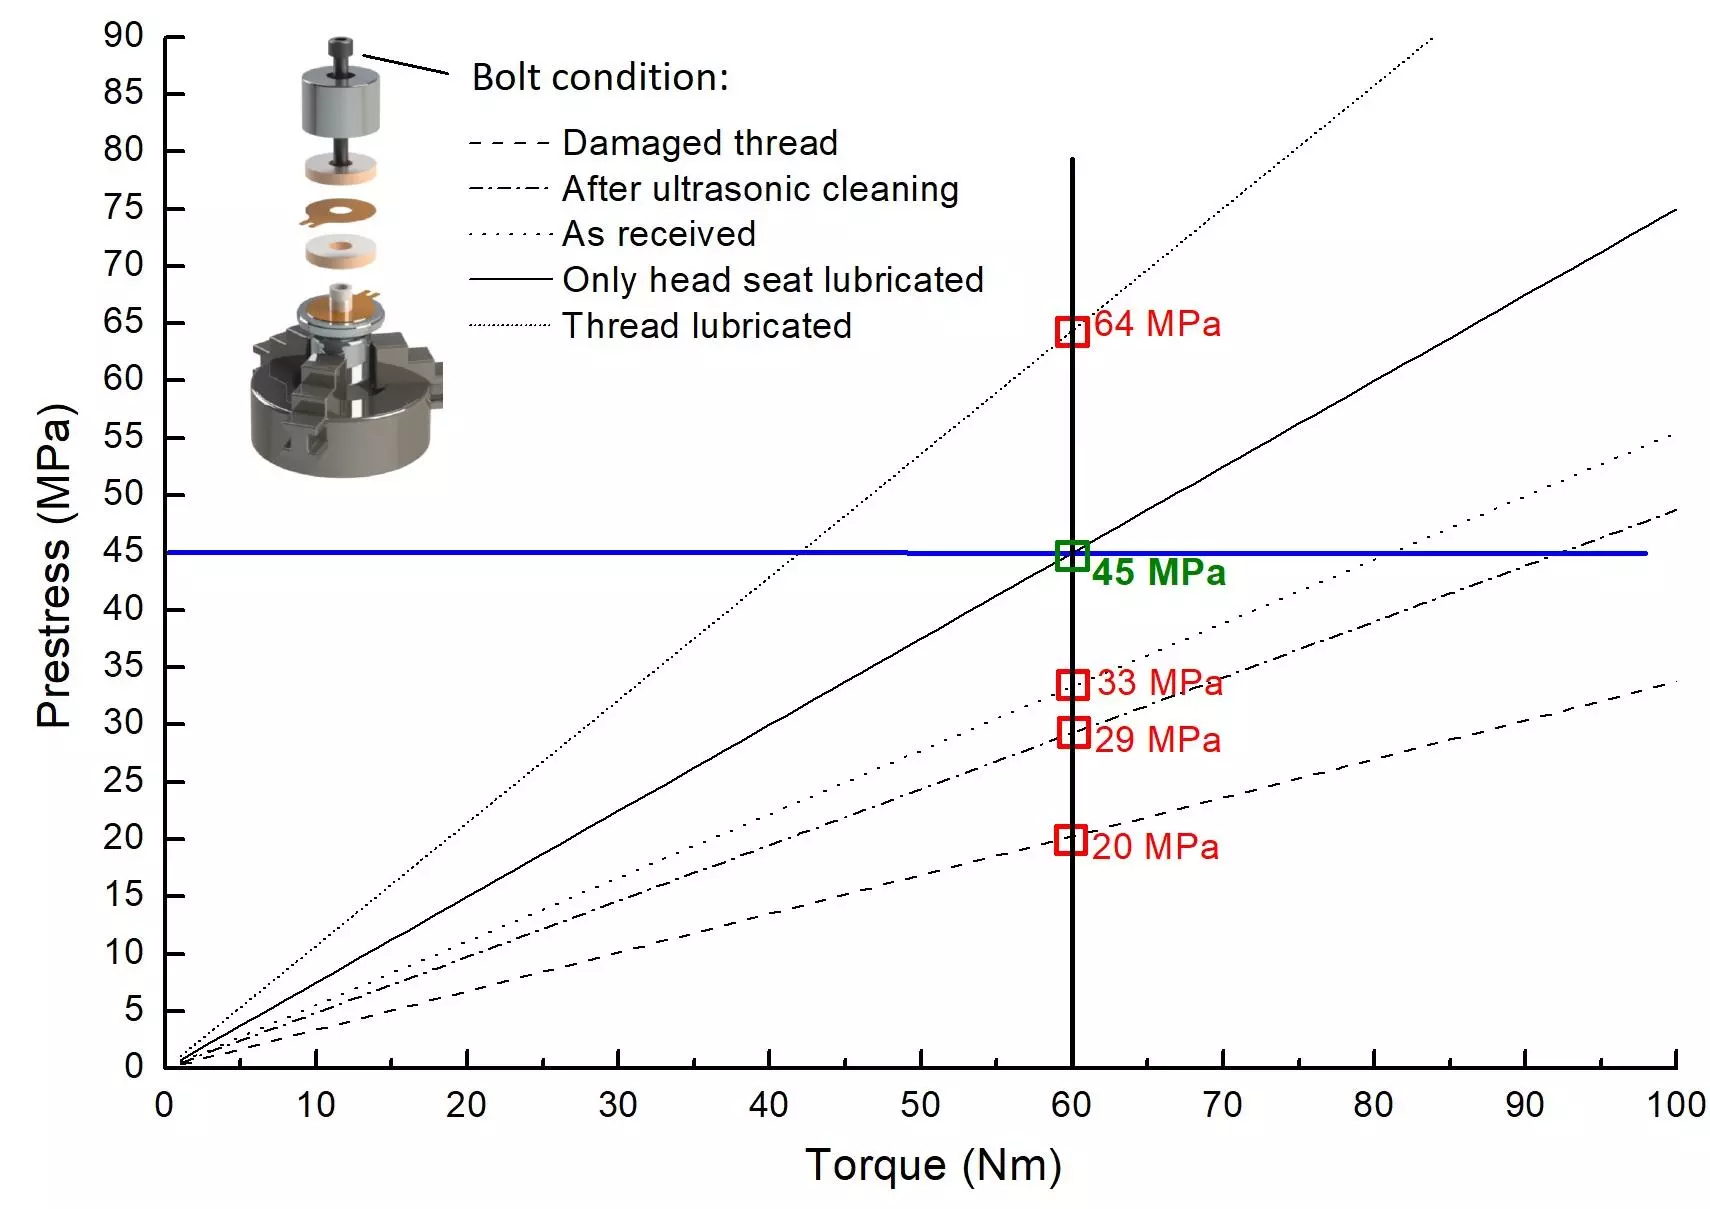 Prestress versus torque for Langevin-type bolt-clamped transducers and ultrasonic converters.